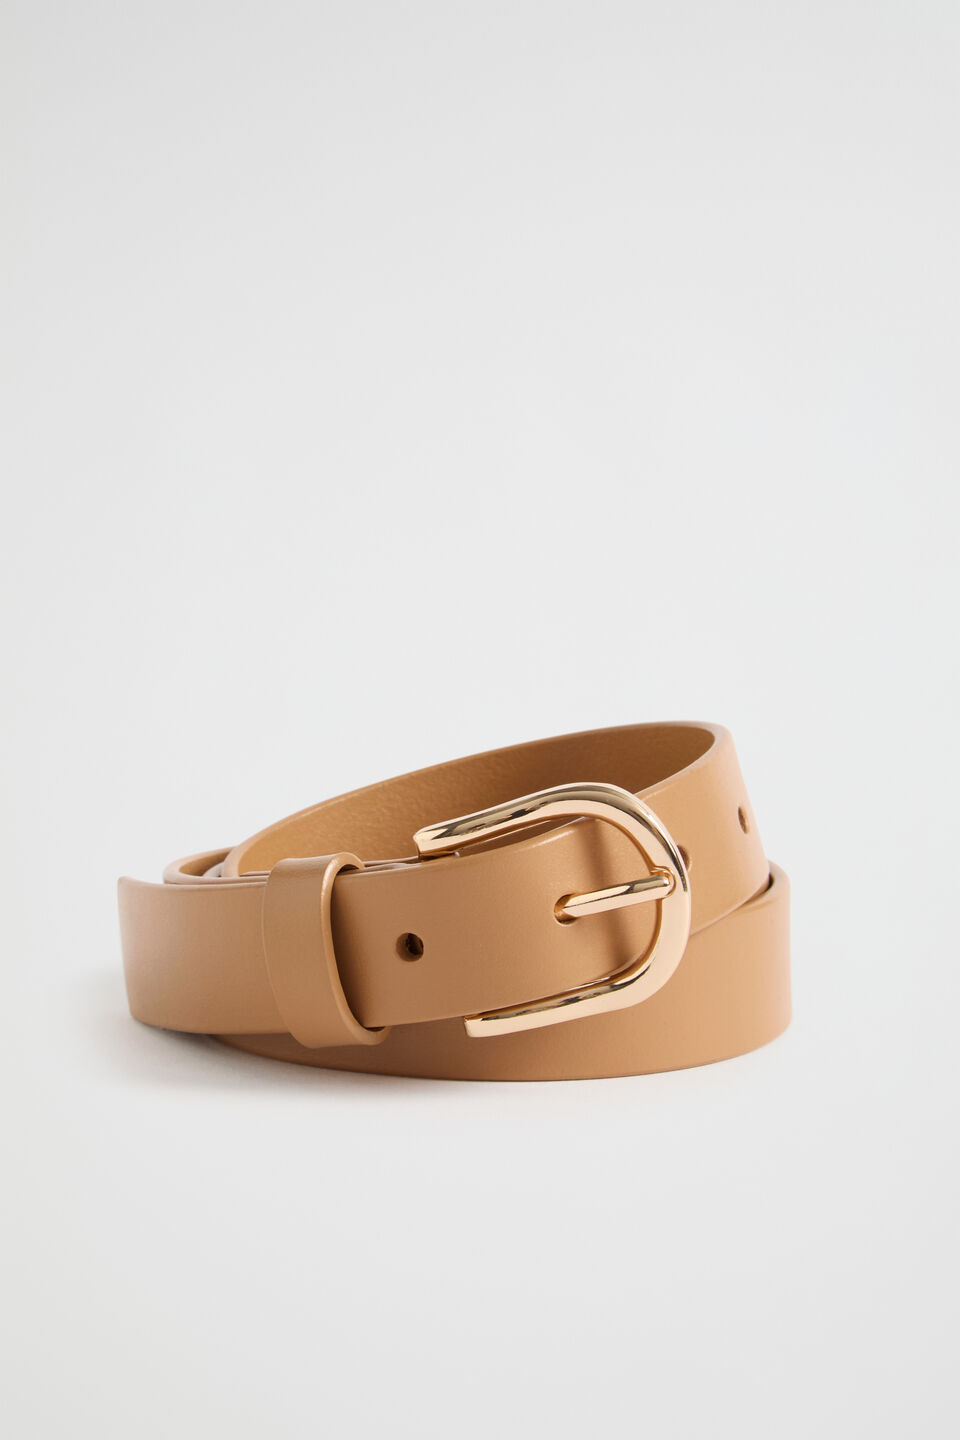 Rory Leather Belt  Tan